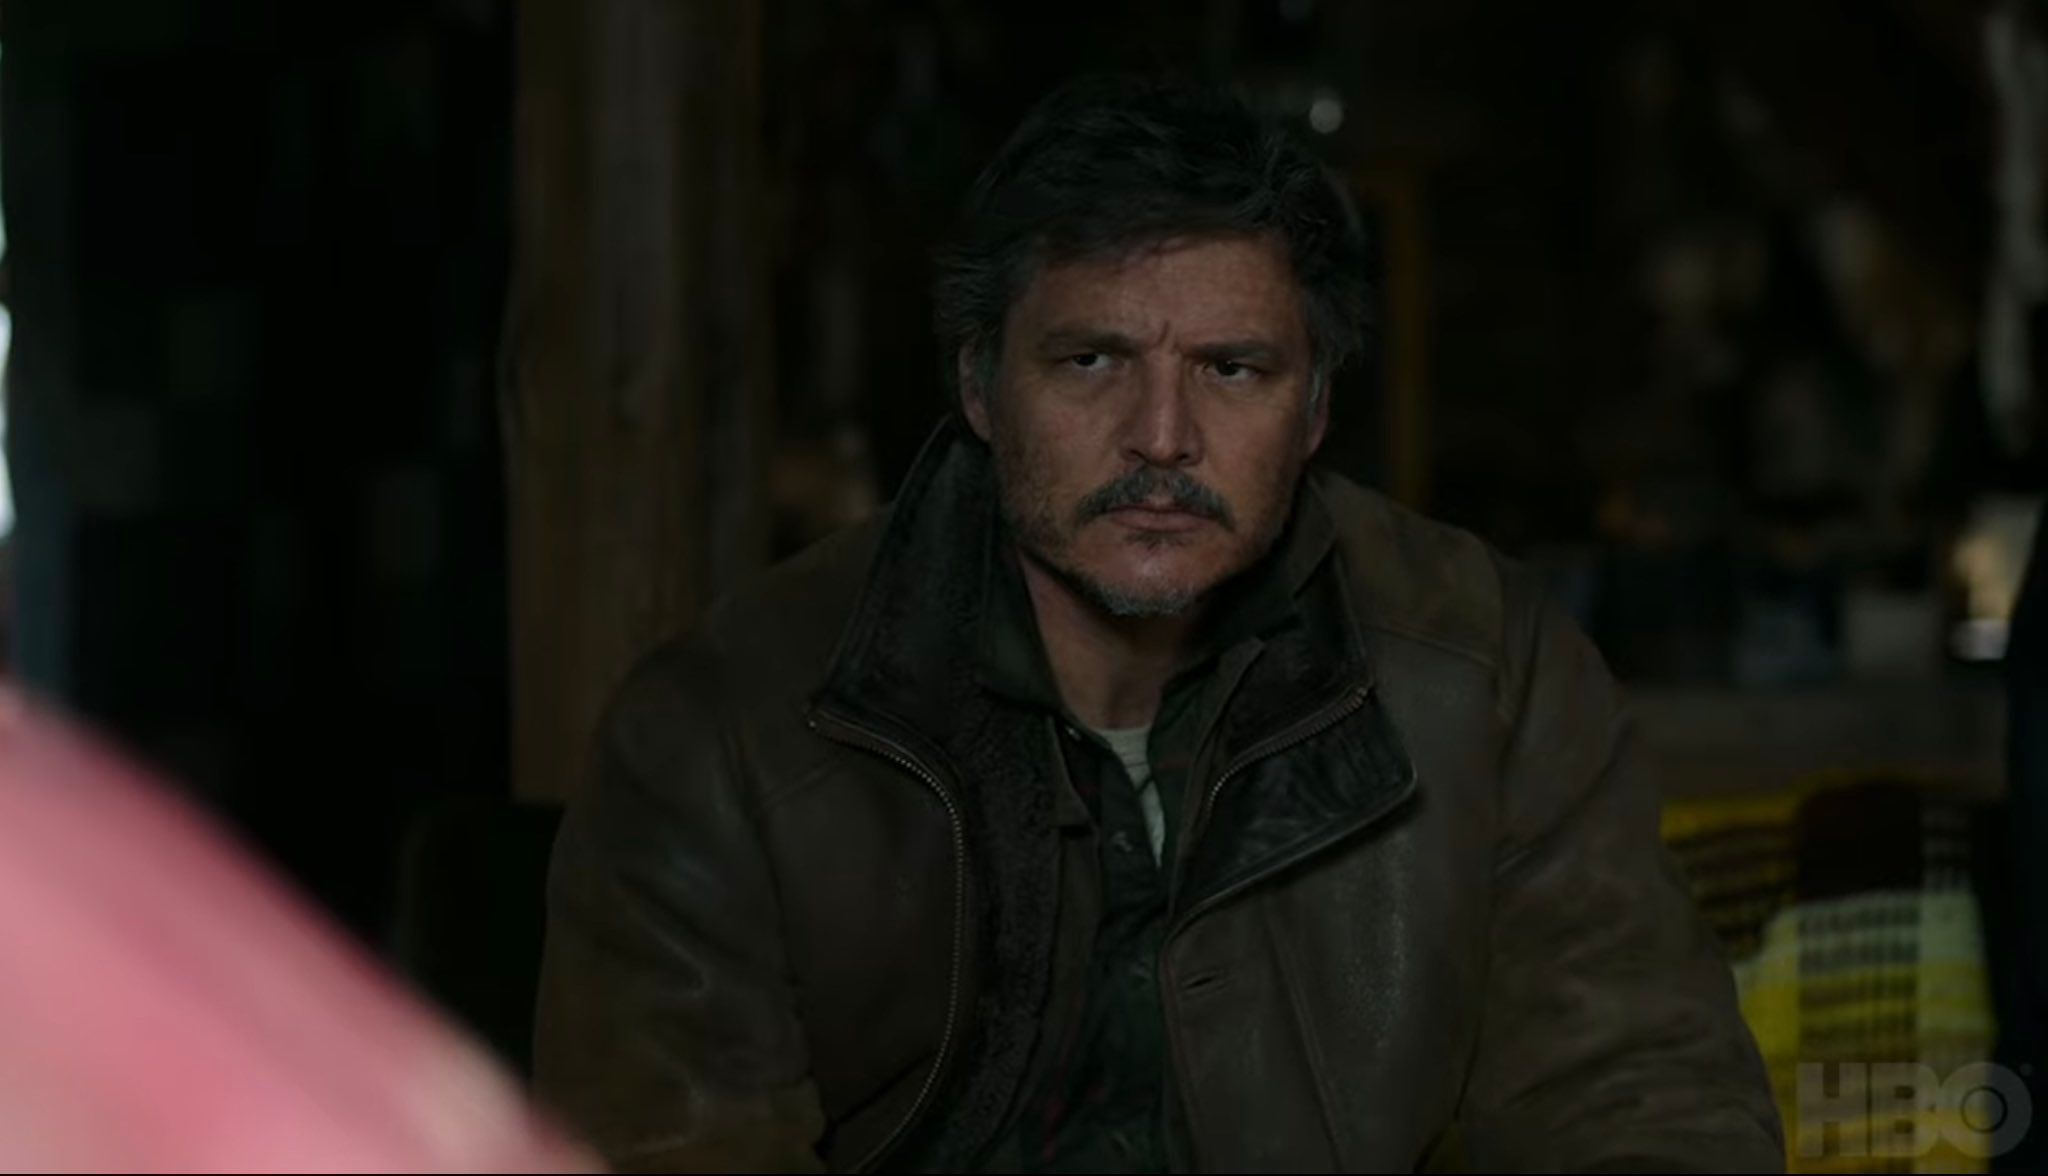 Watch The Last Of Us trailer starring Pedro Pascal, Bella Ramsey